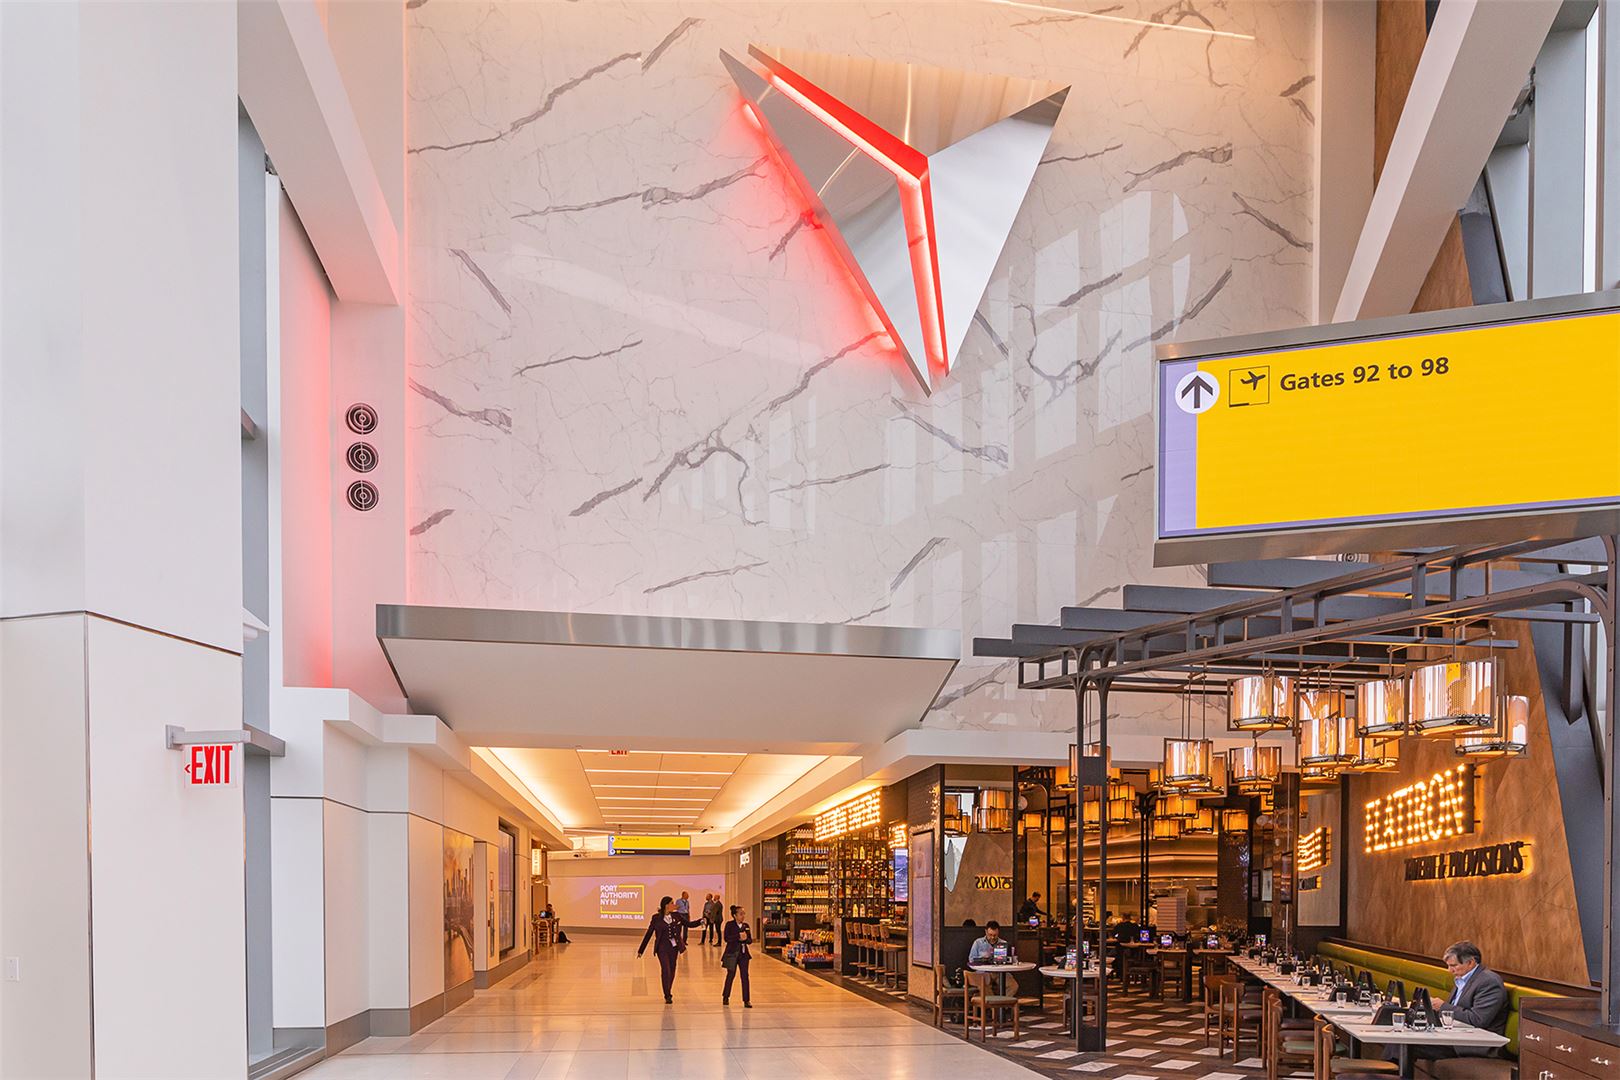 Delta Air Lines Completes New Concourse at LaGuardia Airport